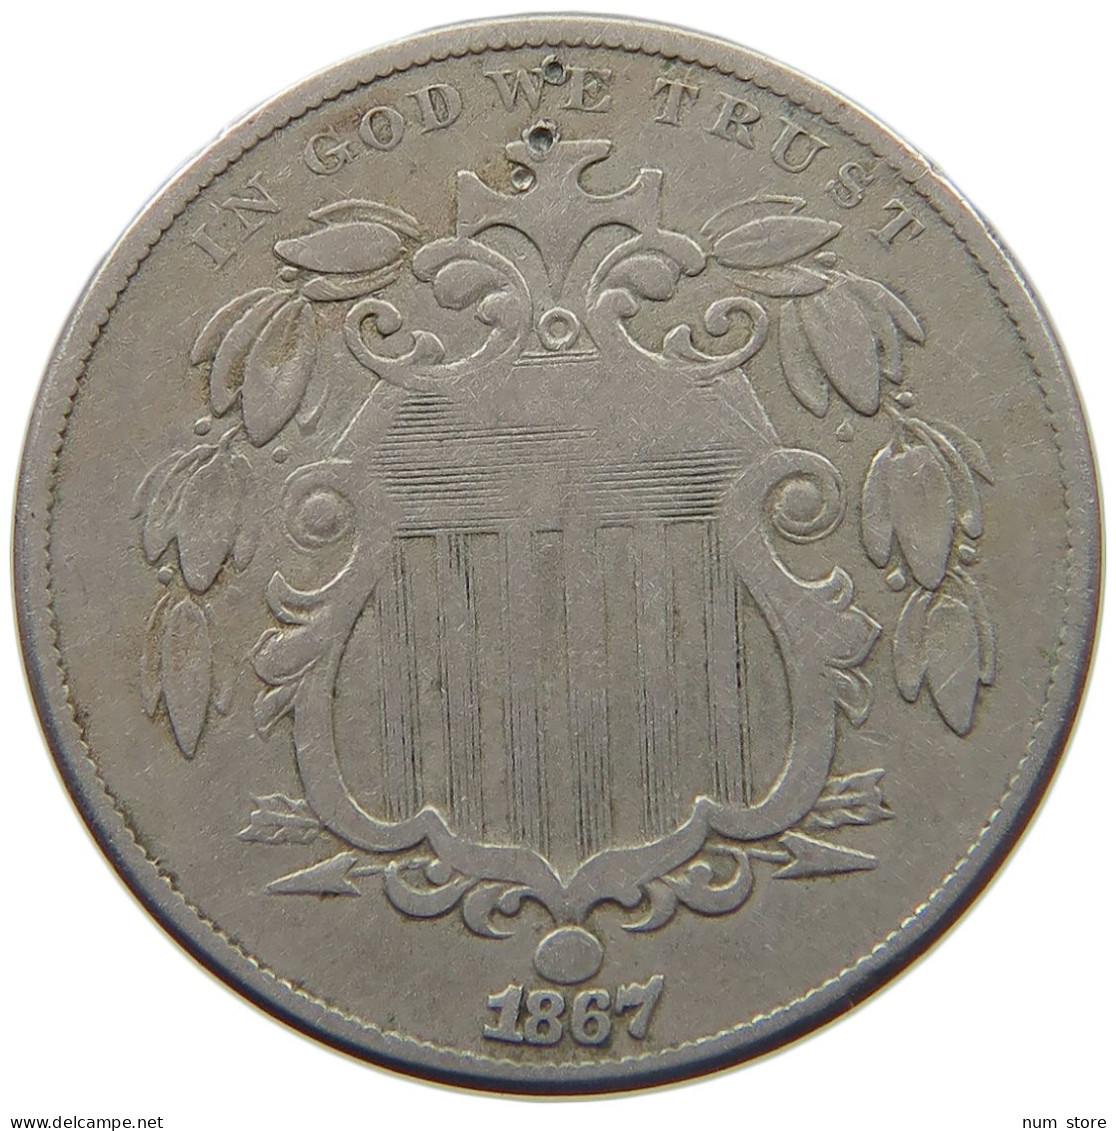 UNITED STATES OF AMERICA NICKEL 1867 SHIELD #t001 0247 - 1866-83: Shield (Écusson)